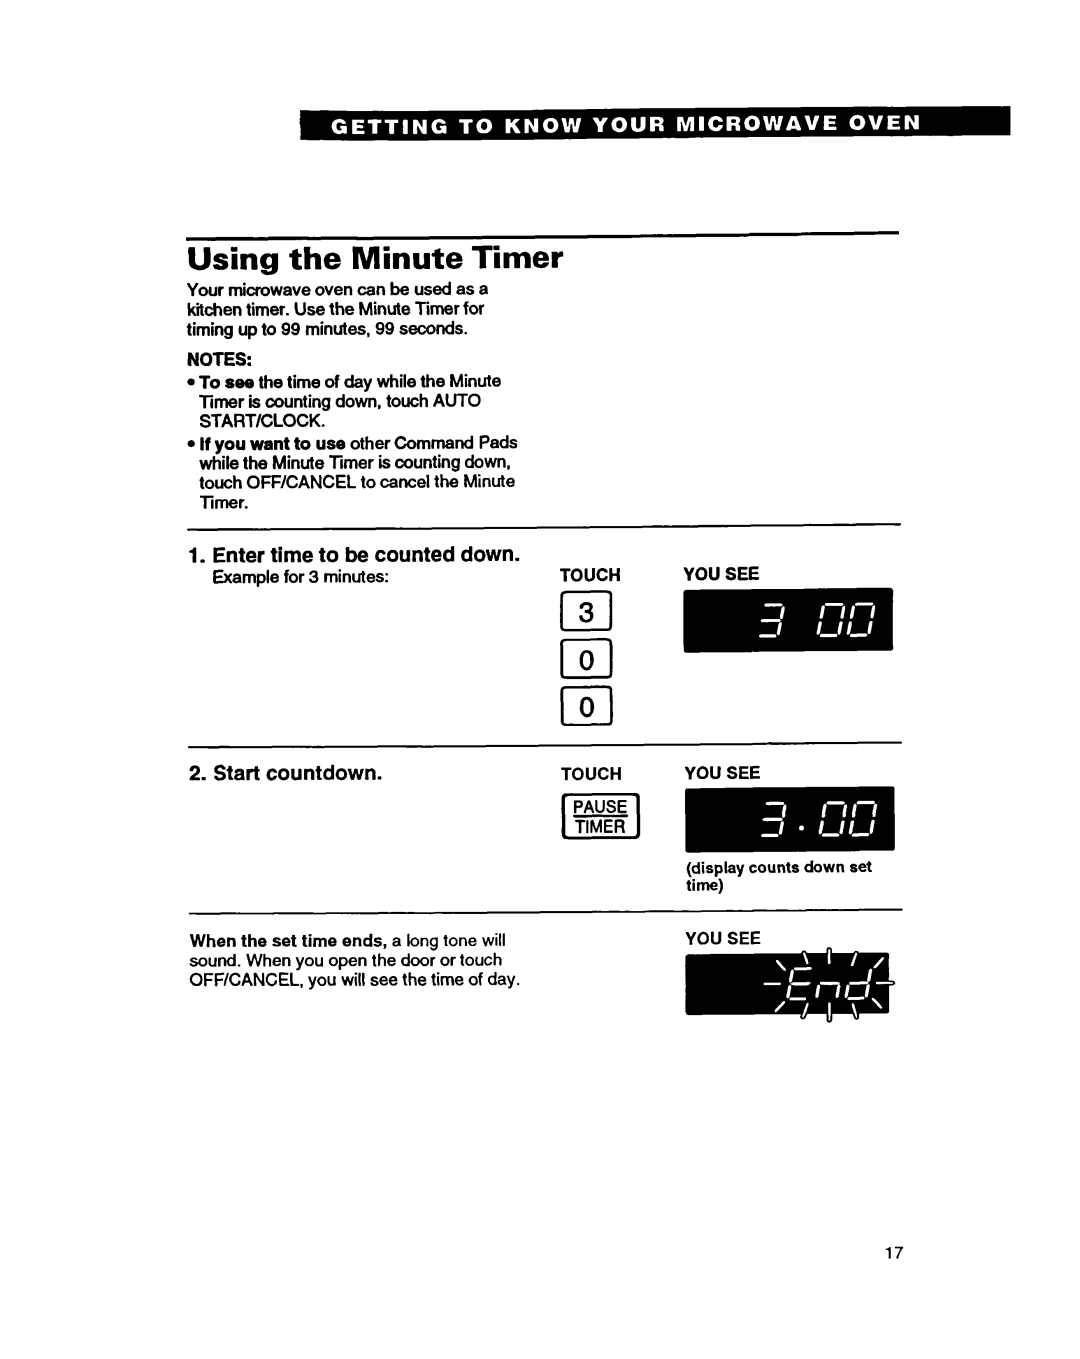 Whirlpool MT9160XBB warranty Using the Minute Timer, Enter time to be counted down, Start countdown 